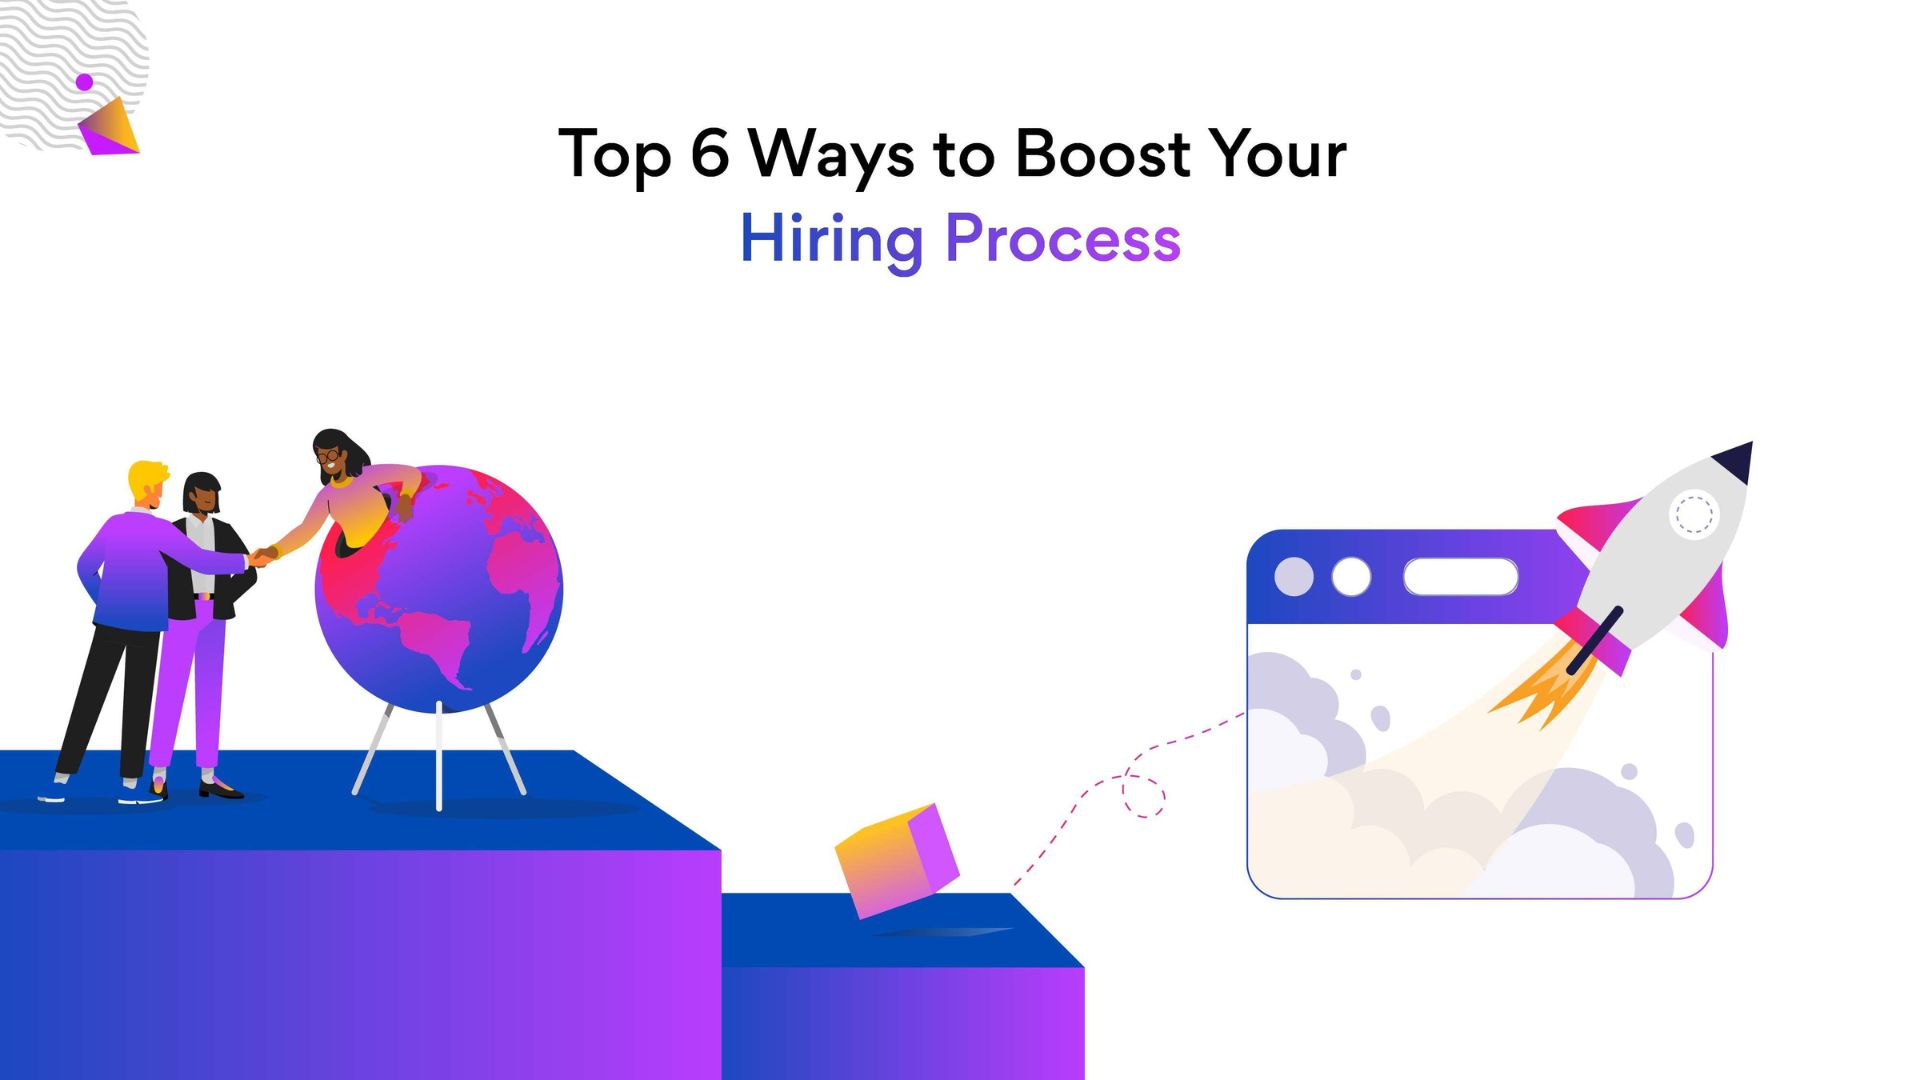 Top 6 Ways to Boost Your Hiring Process